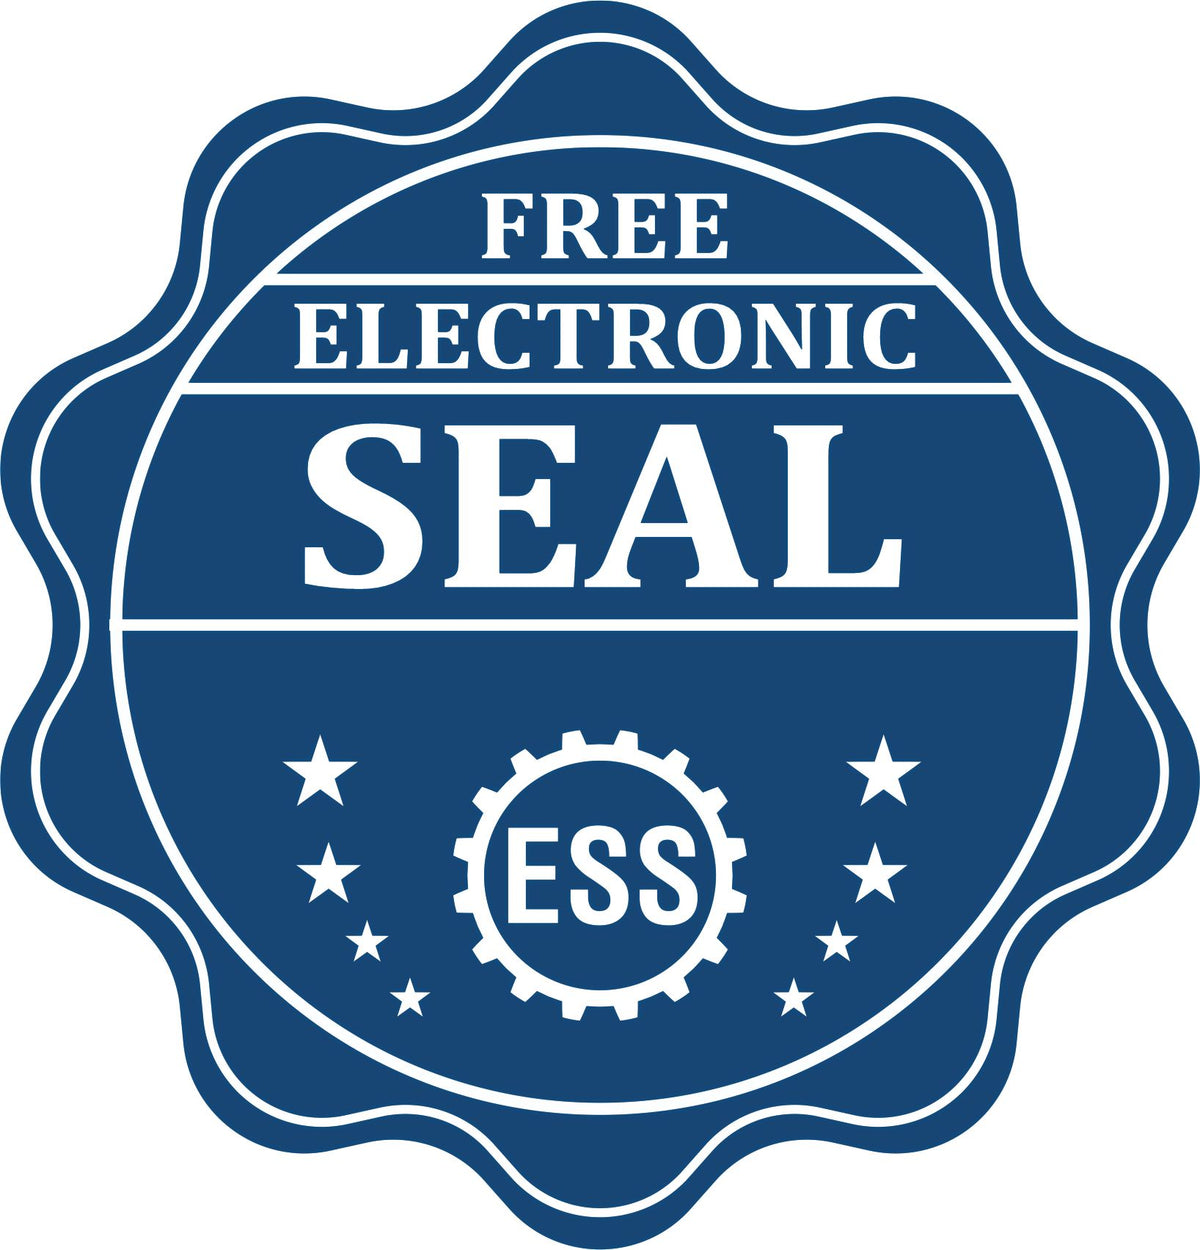 A badge showing a free electronic seal for the MaxLight Premium Pre-Inked Connecticut State Seal Notarial Stamp with stars and the ESS gear on the emblem.